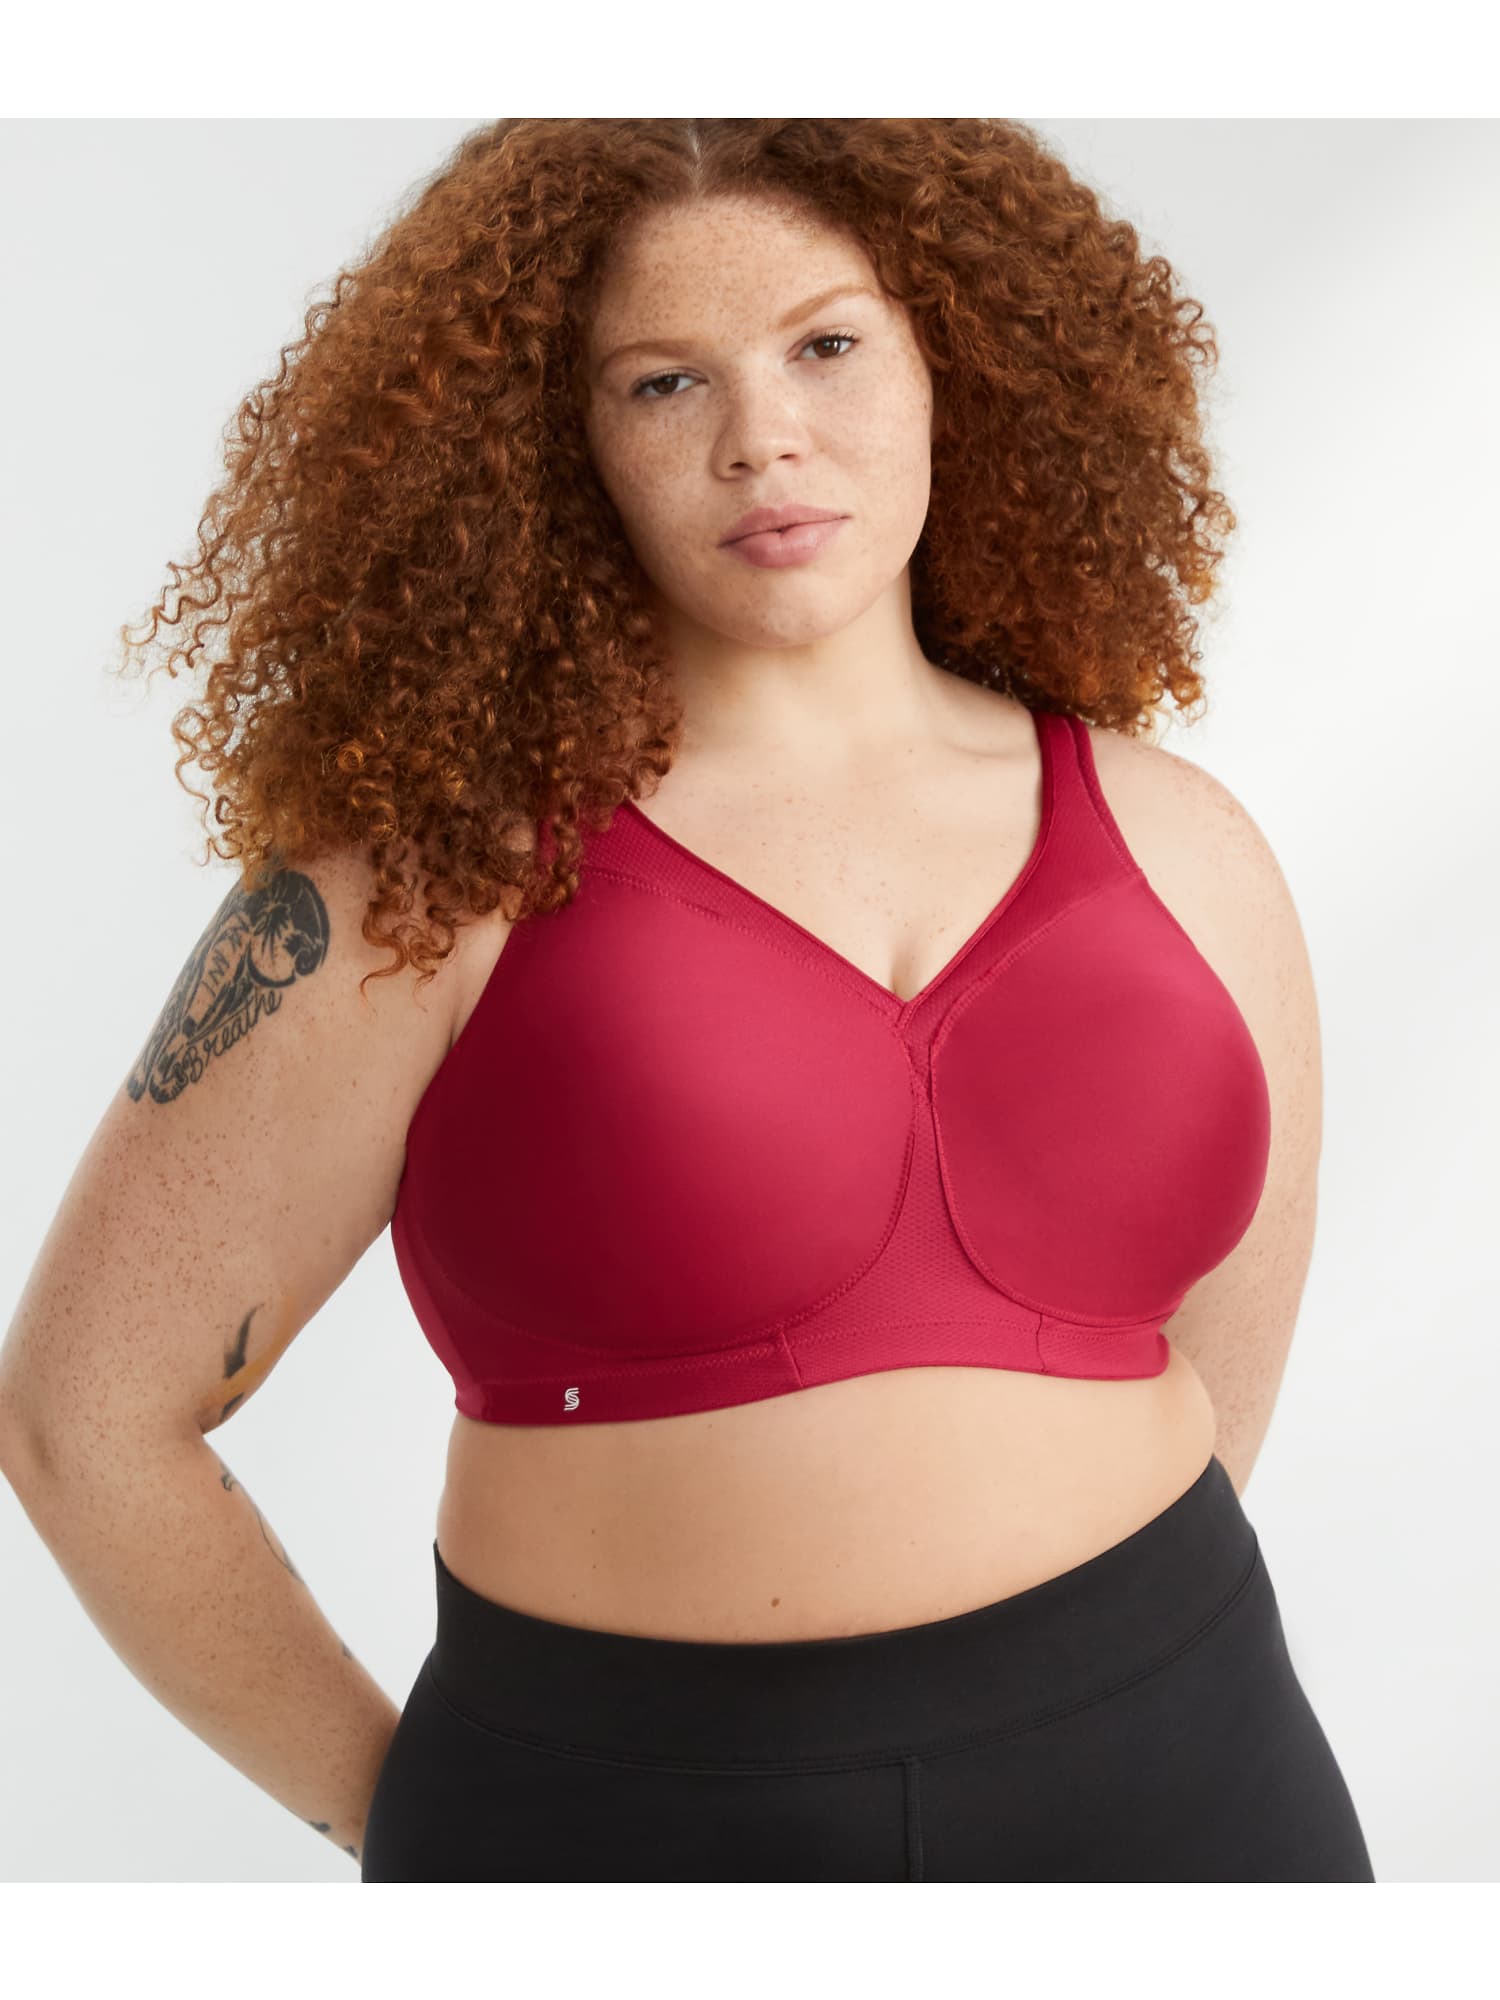  Full Figure Plus Size MagicLift Seamless Sports Bra Wirefree  #1006 Ruby Red